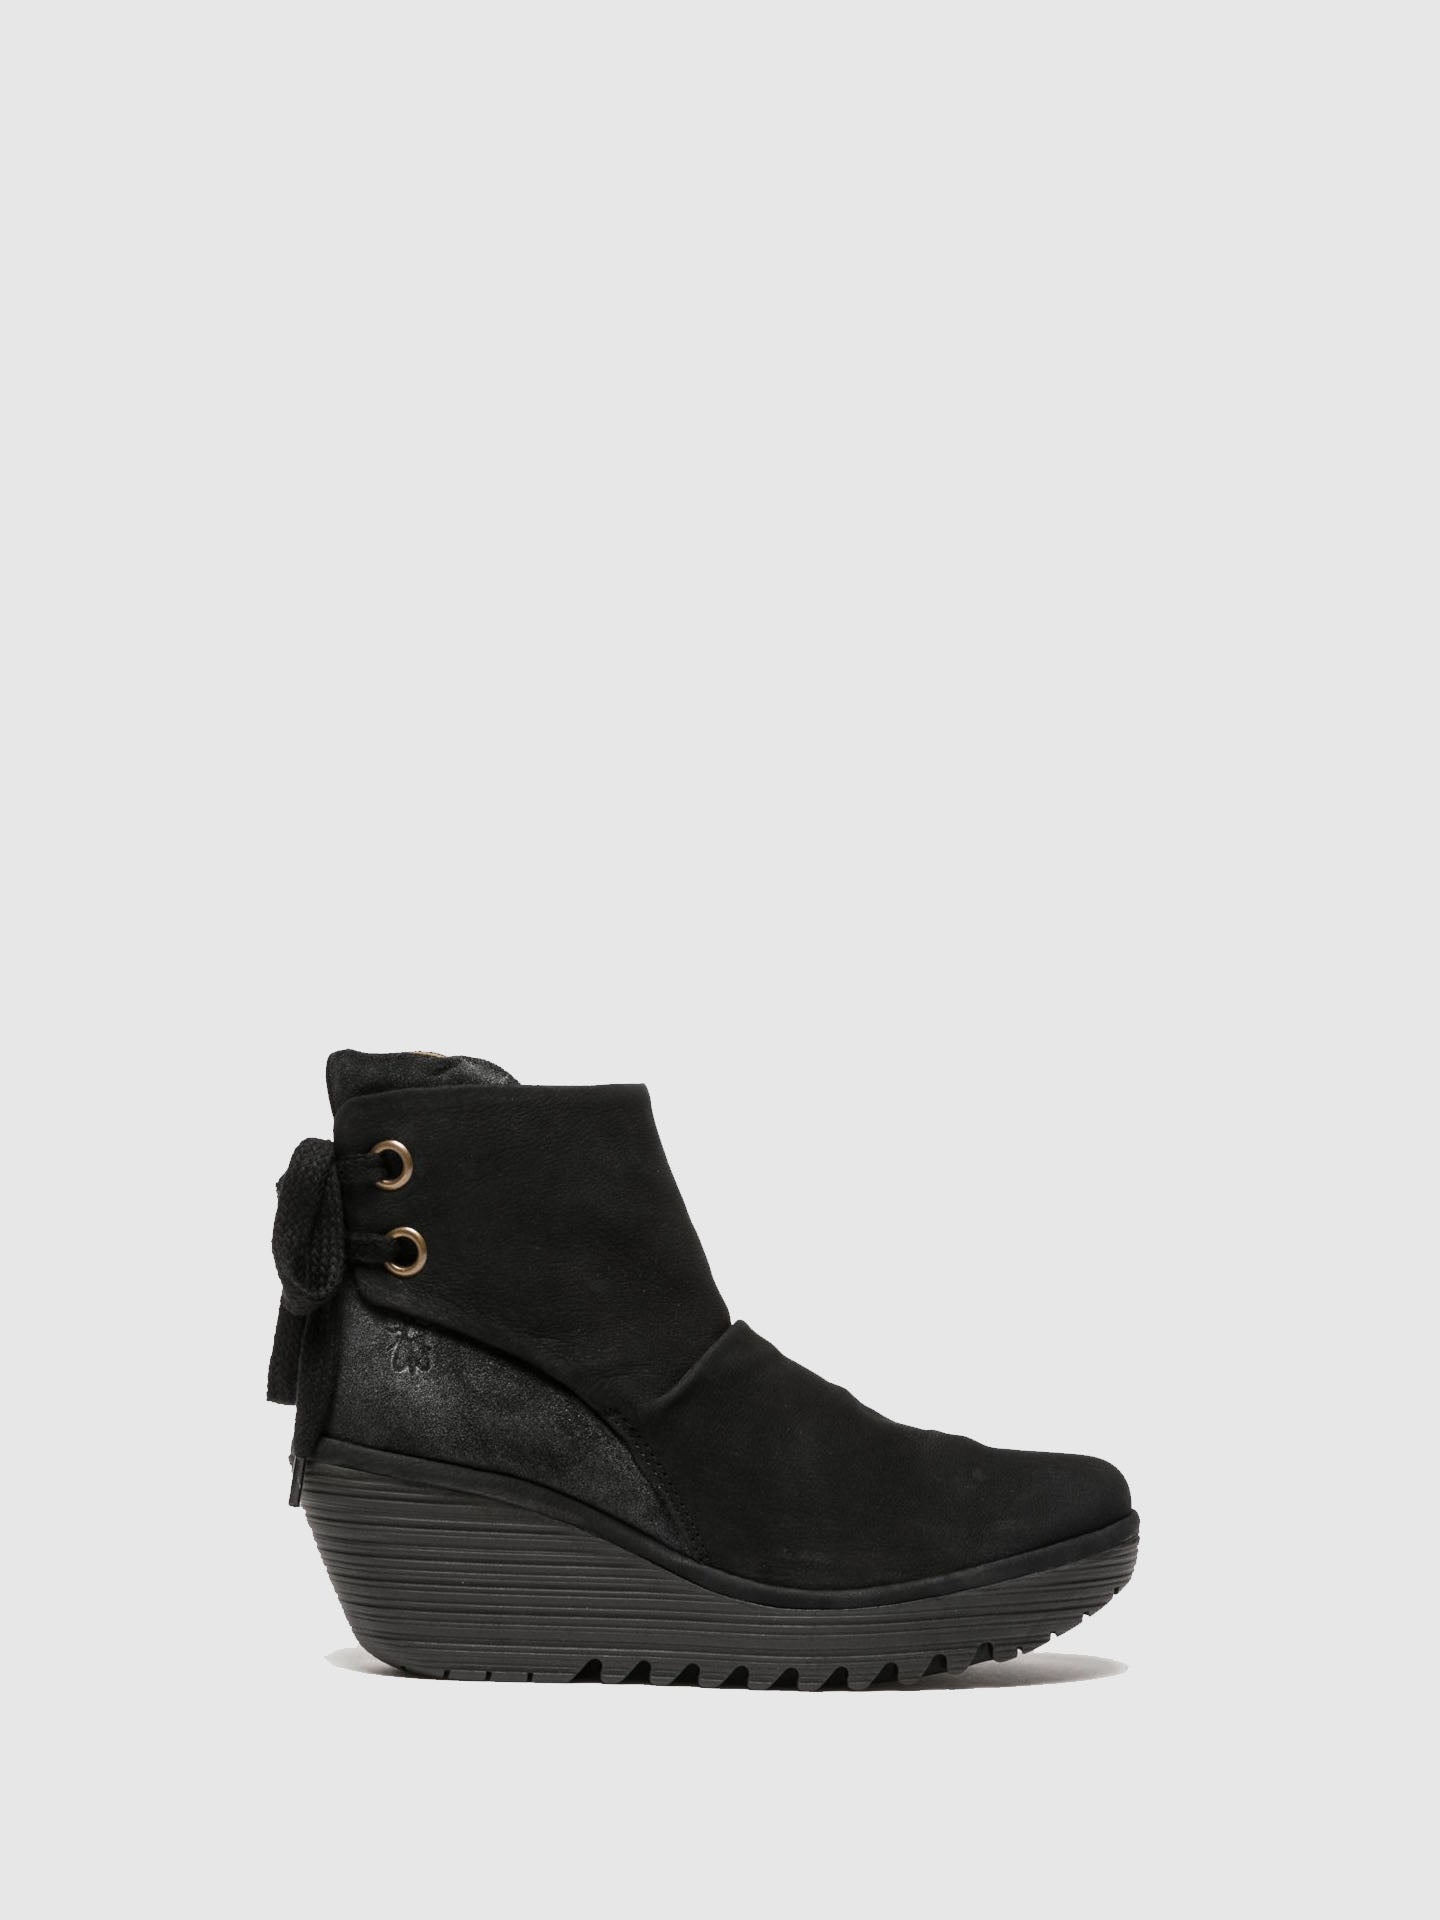 Fly London Black Wedge Ankle Boots